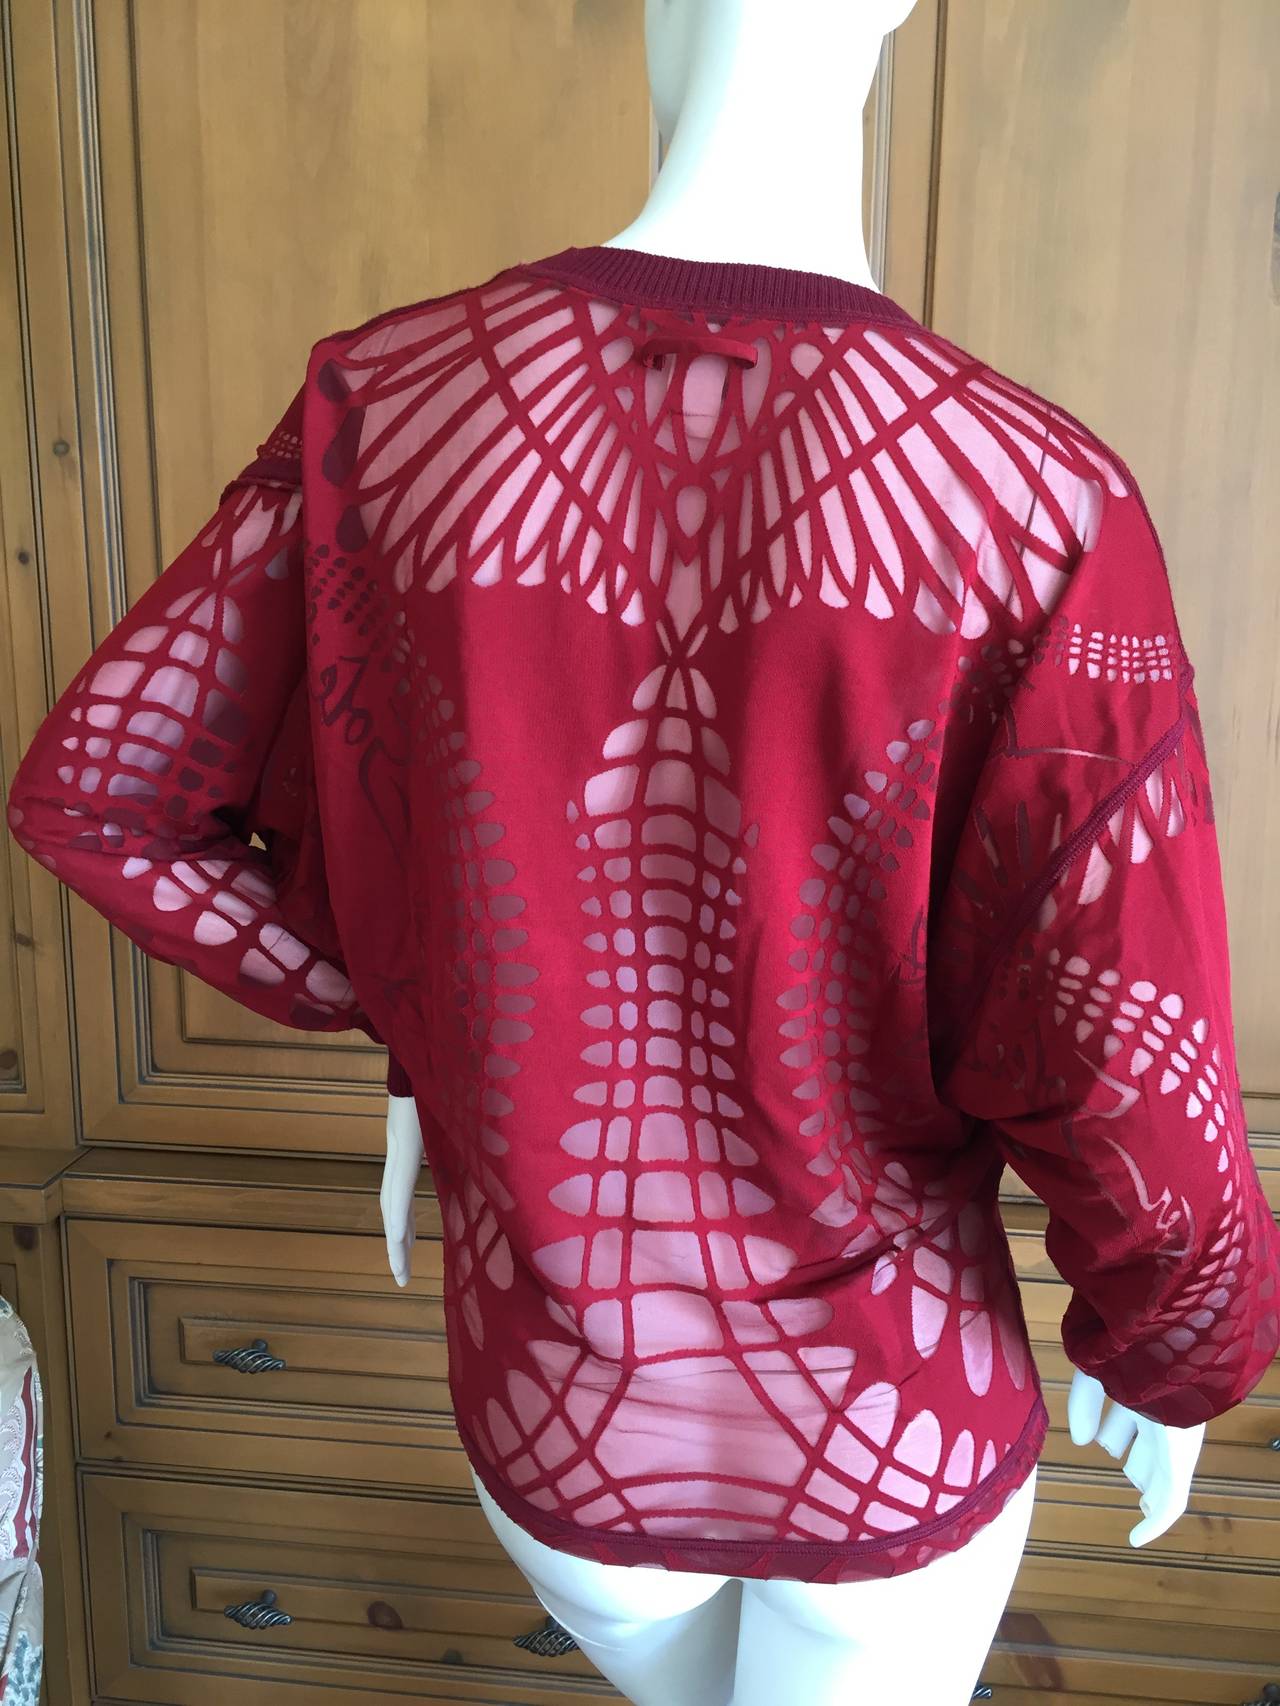 Wonderful red sheer cut out top from Jean Paul Gaultier Solieil.